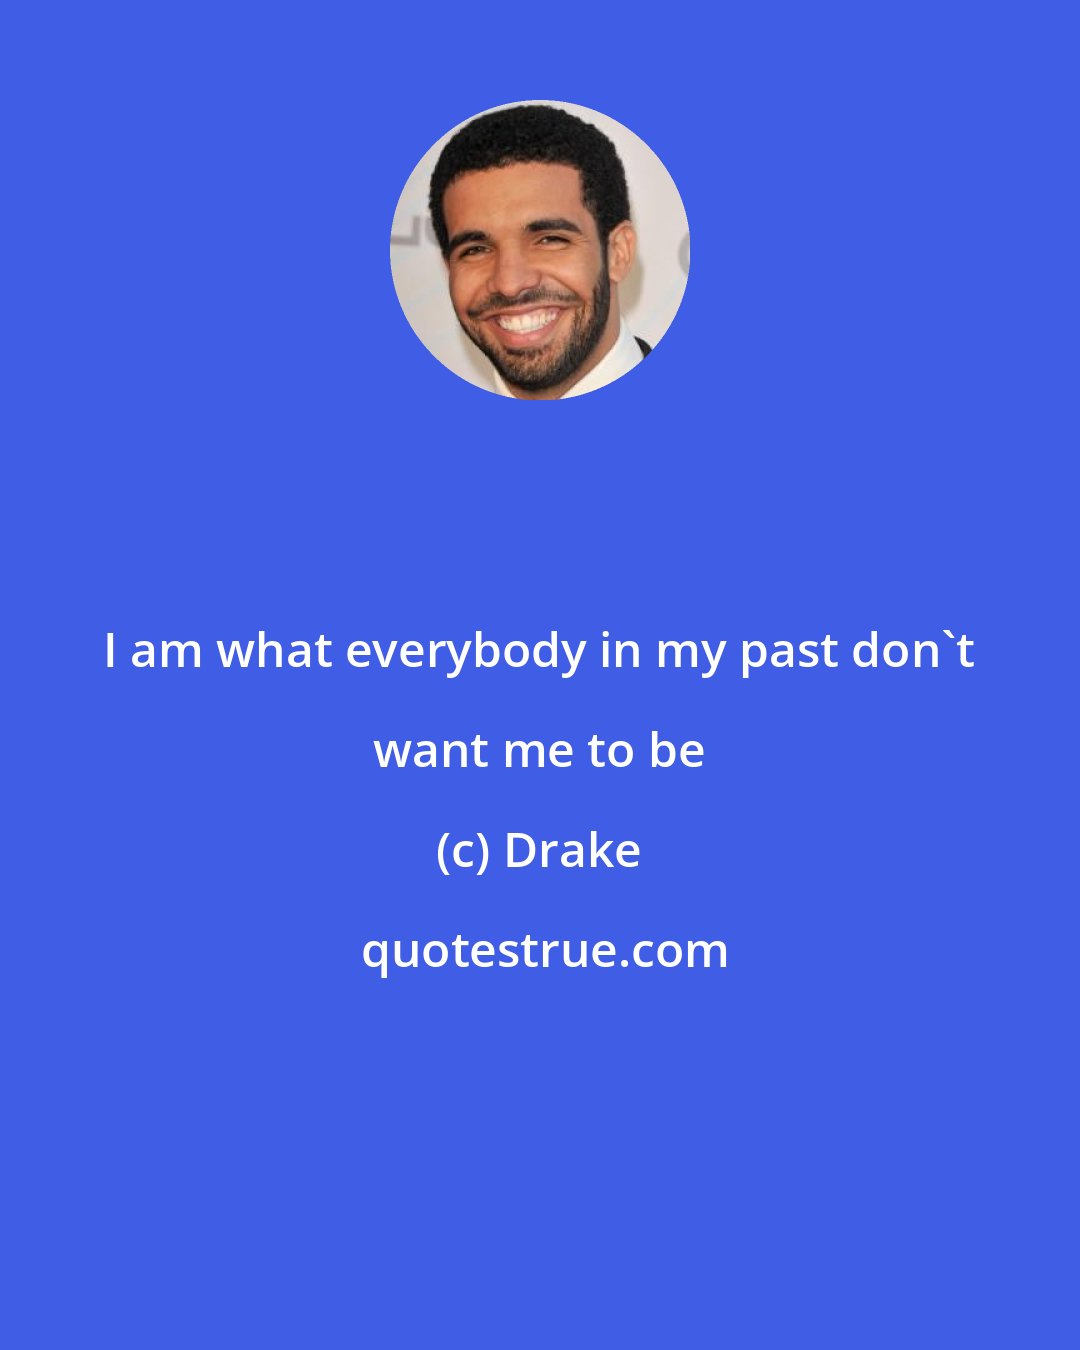 Drake: I am what everybody in my past don't want me to be